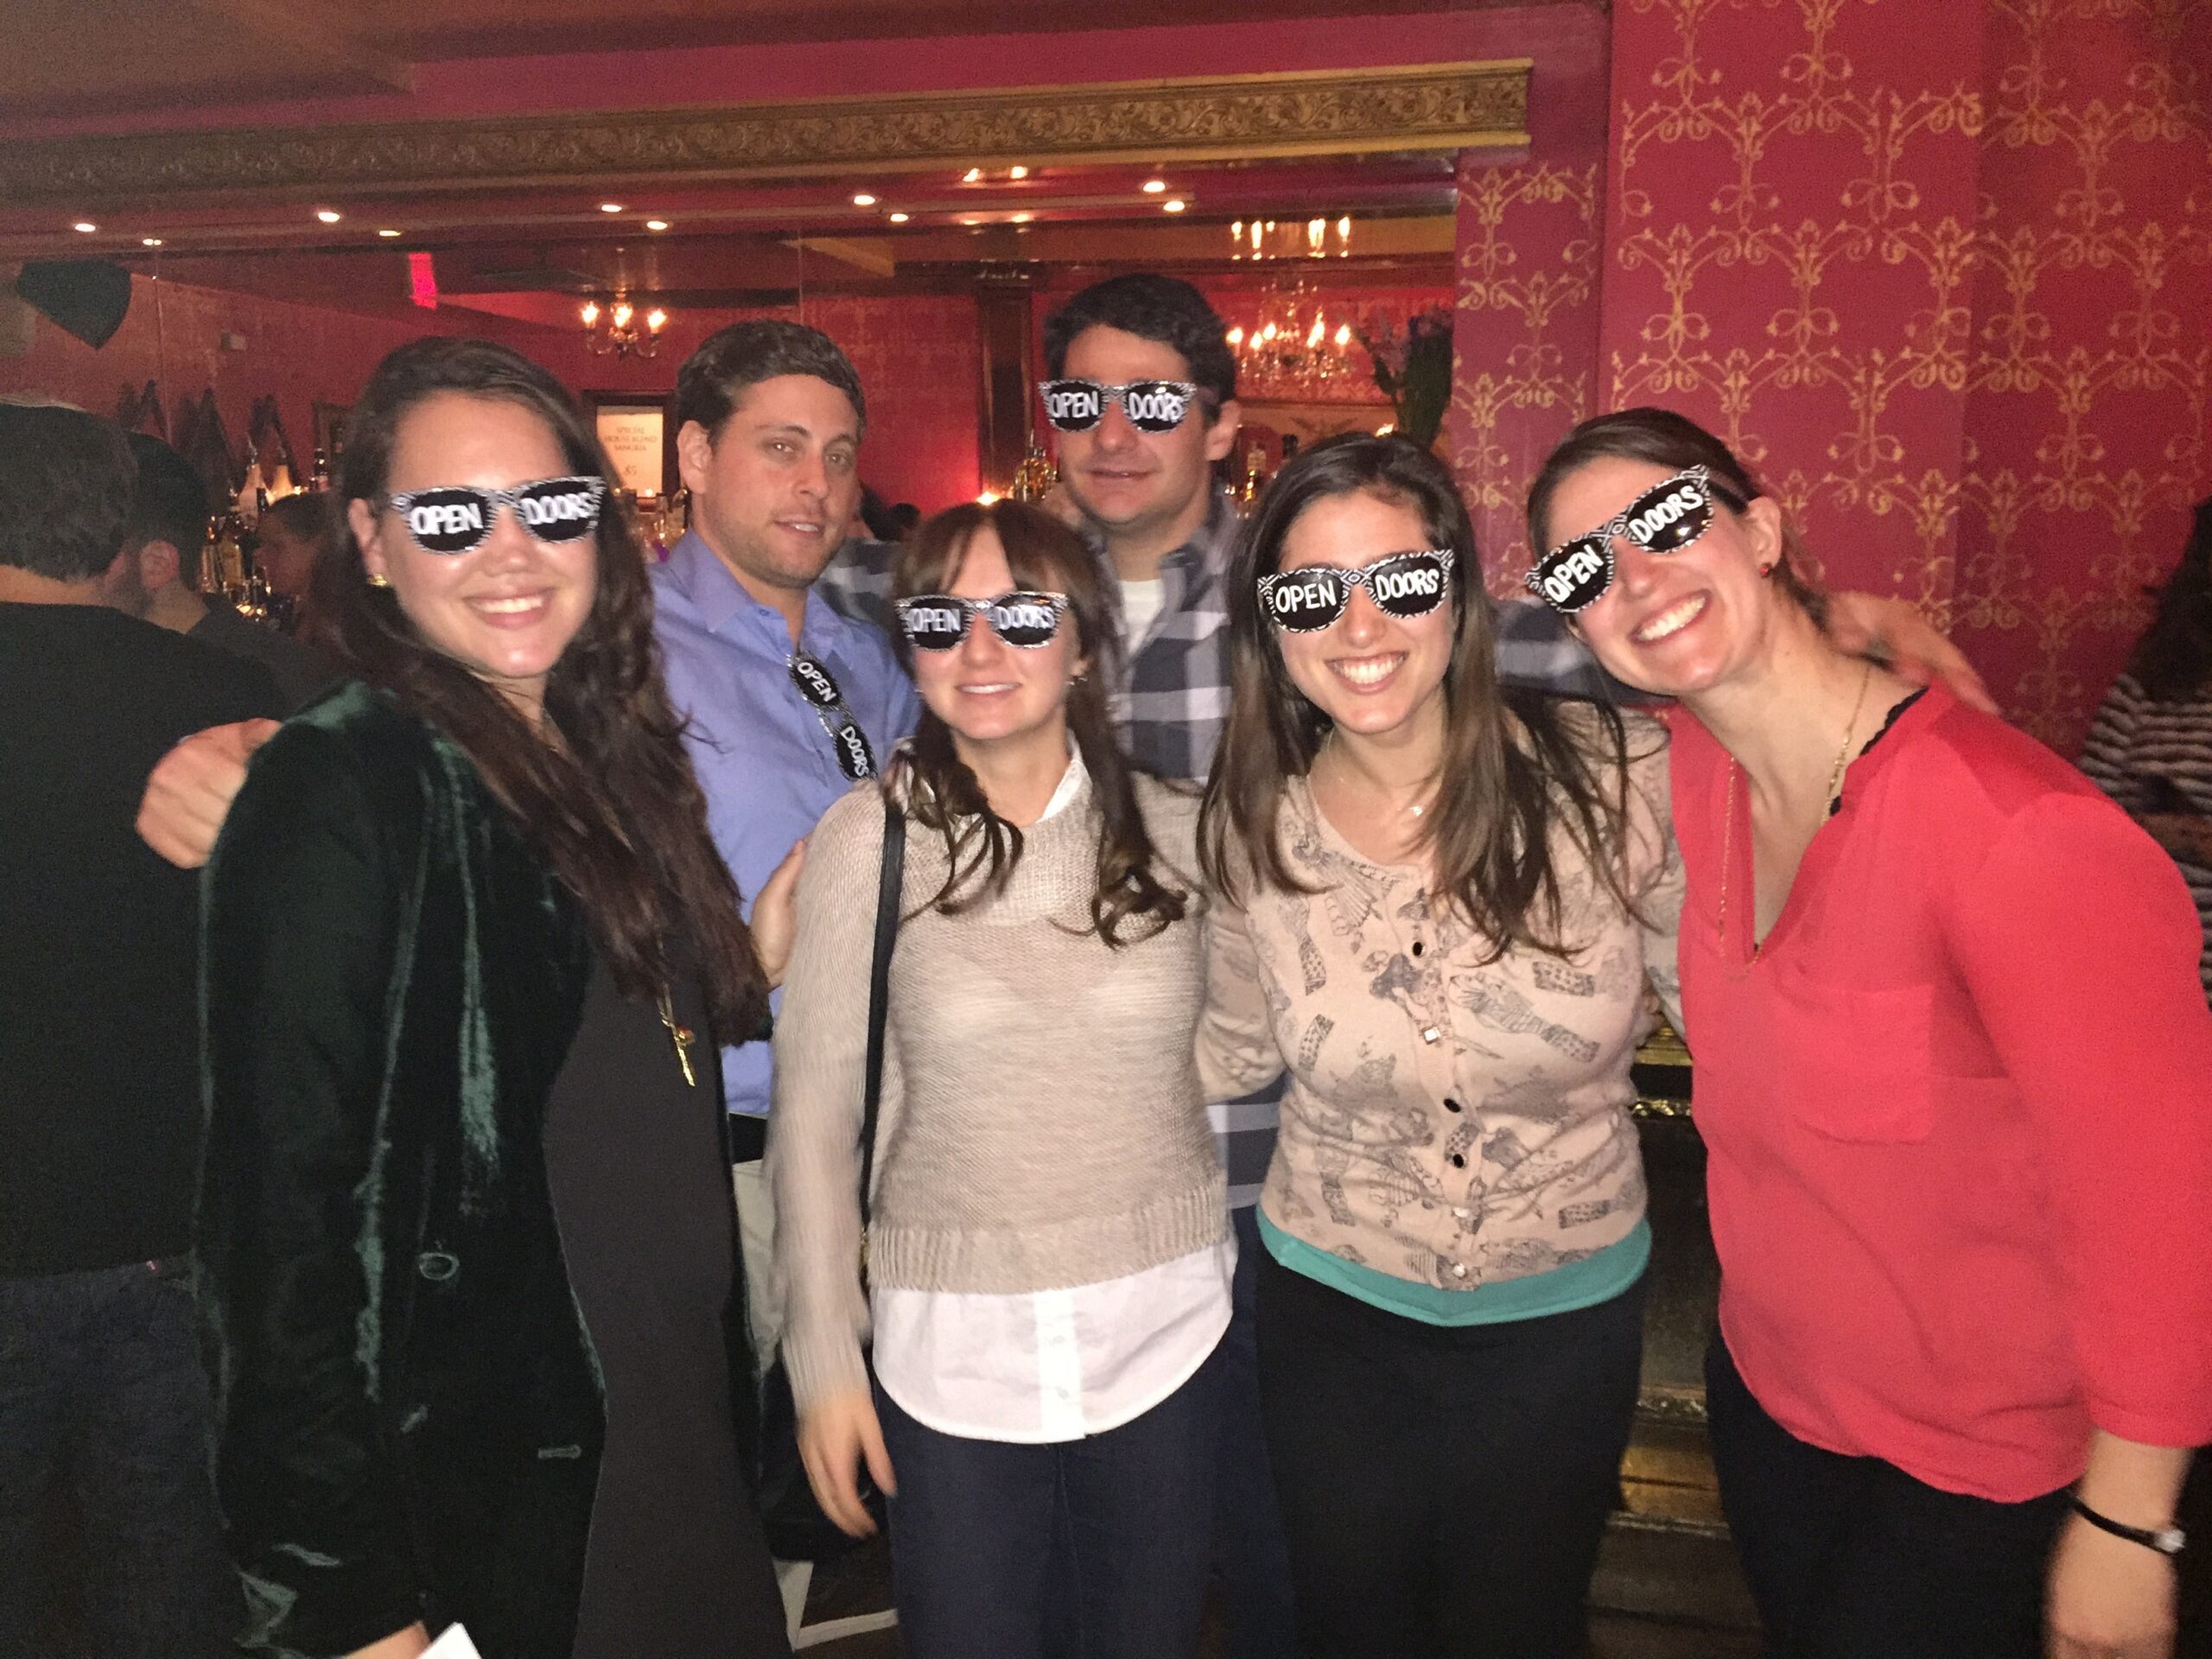 Gather staff and Open Doors fellows pose together in ODF-branded sunglasses at an event. 